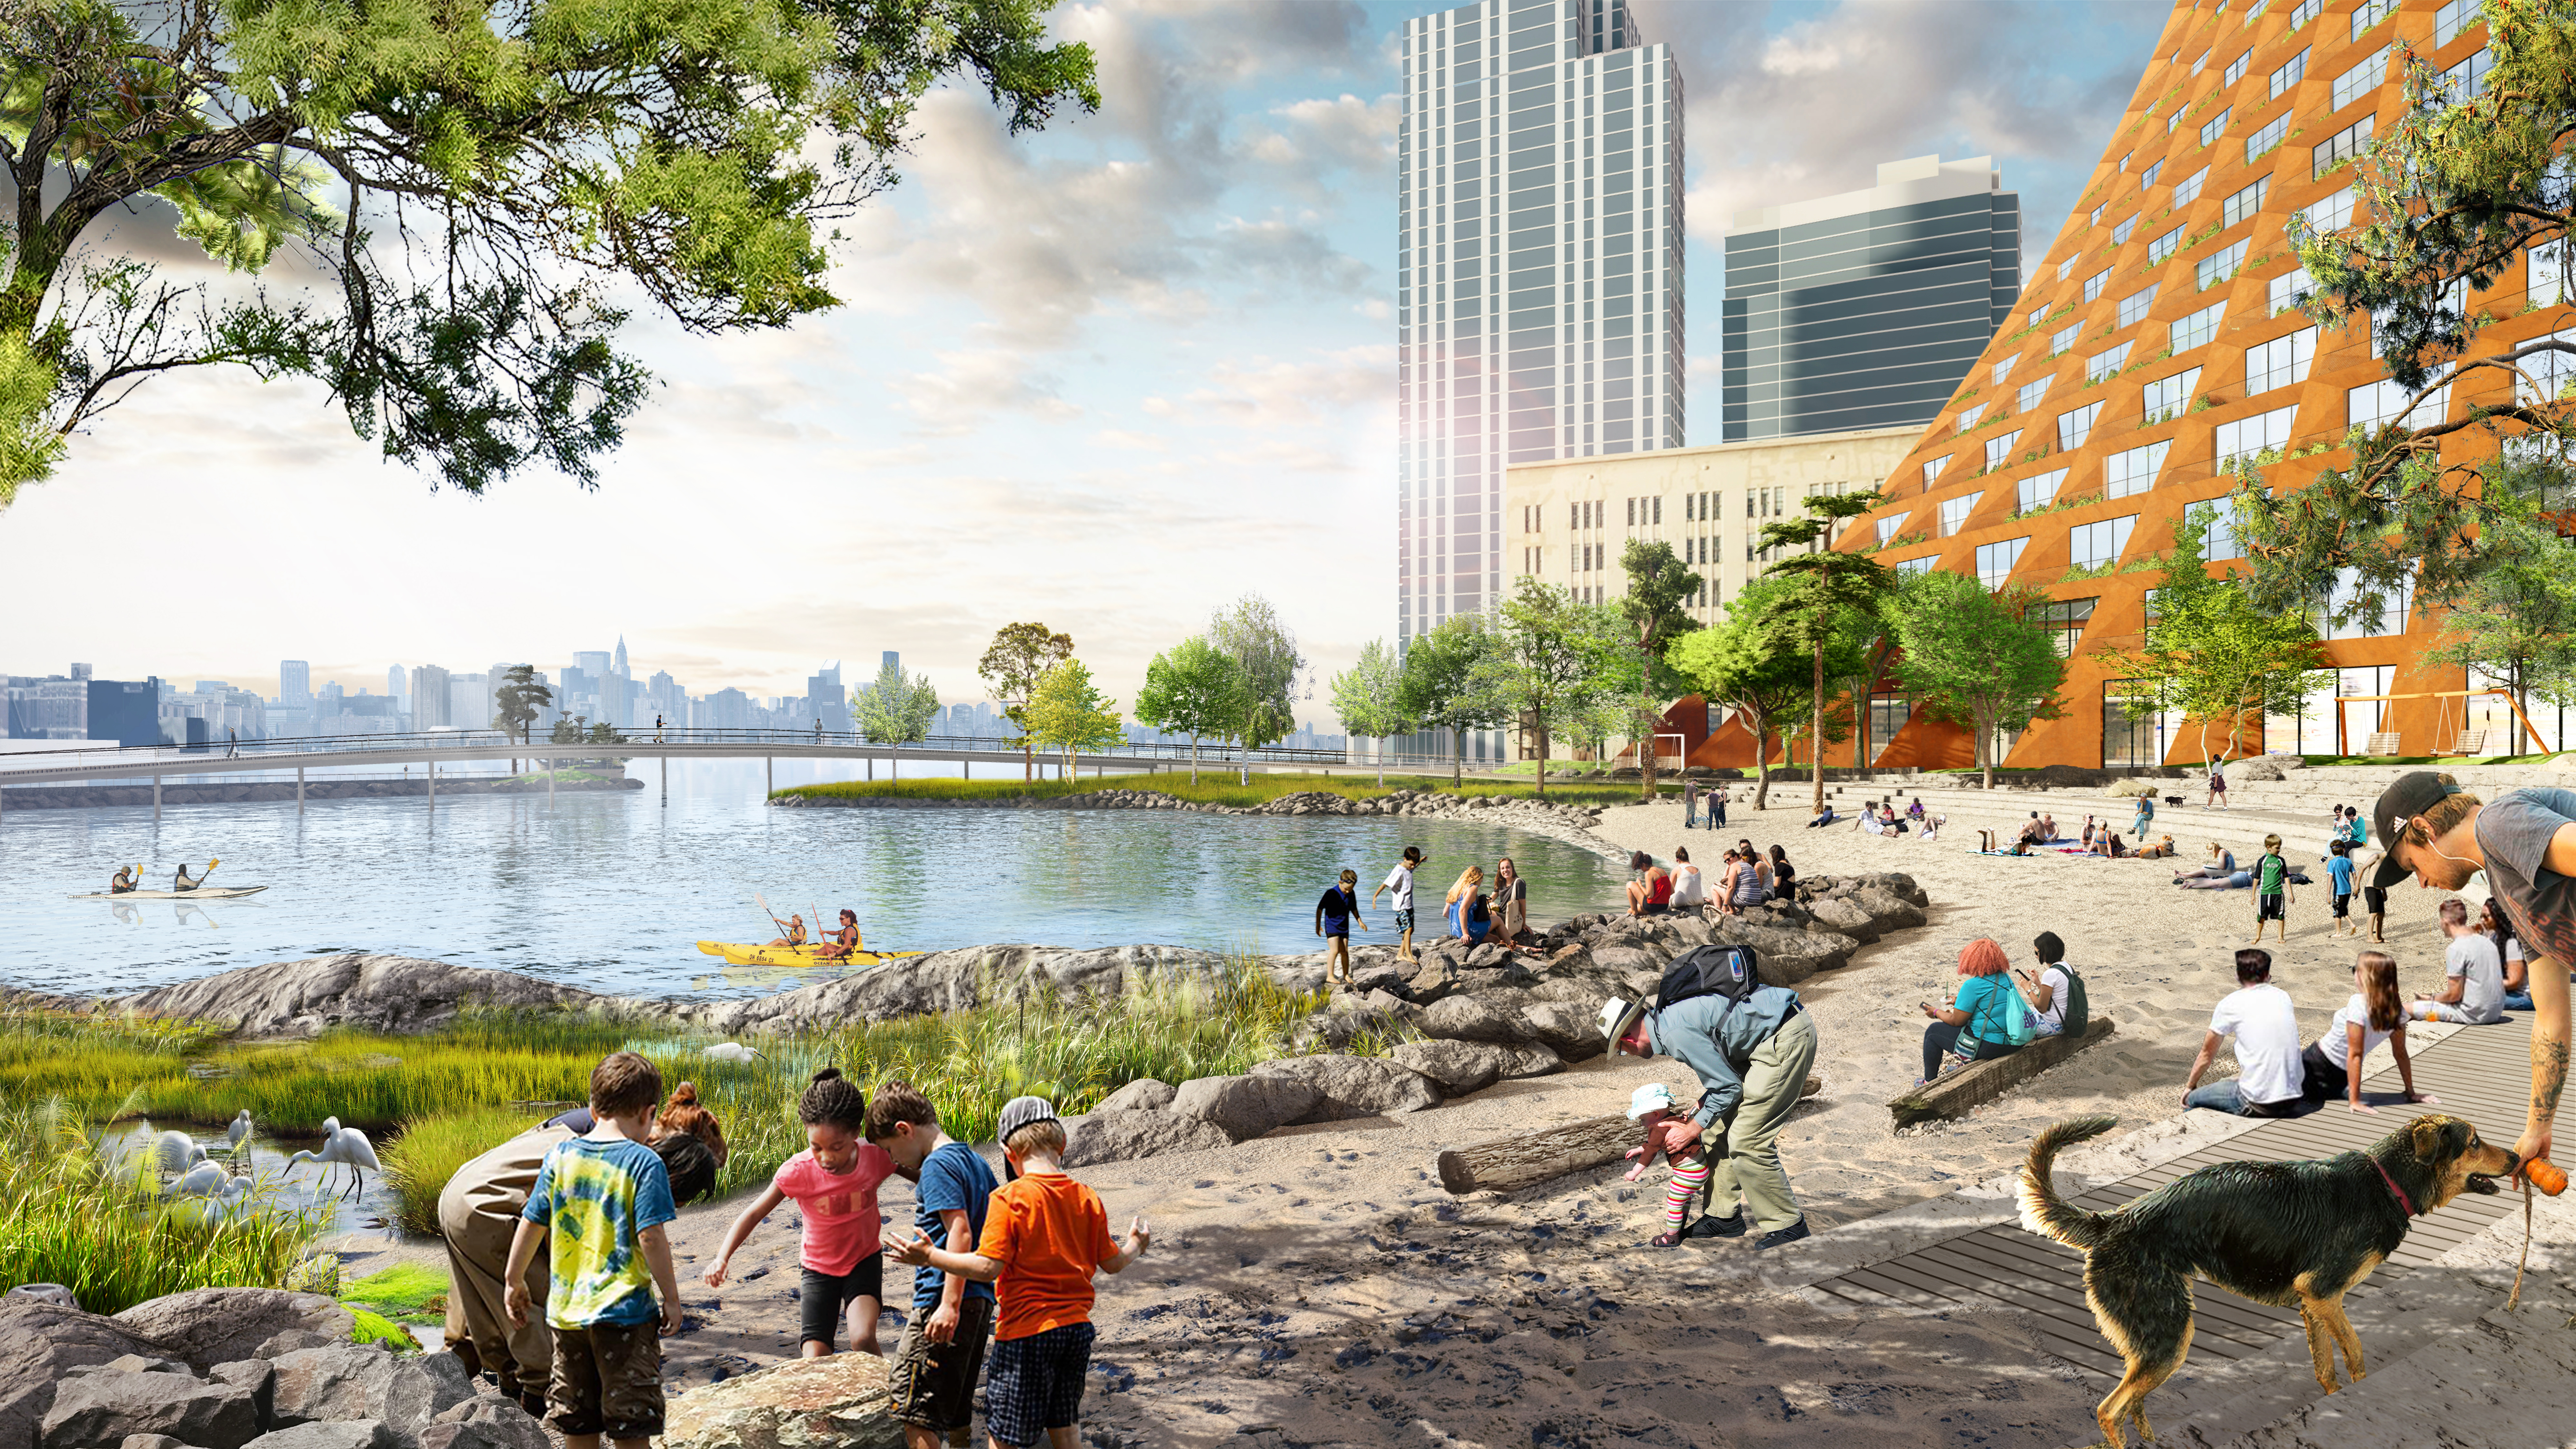 The planned River Street park will have a sandy beach. Rendering by James Corner Field Operations and BIG-Bjarke Ingels Group courtesy of Two Trees Management